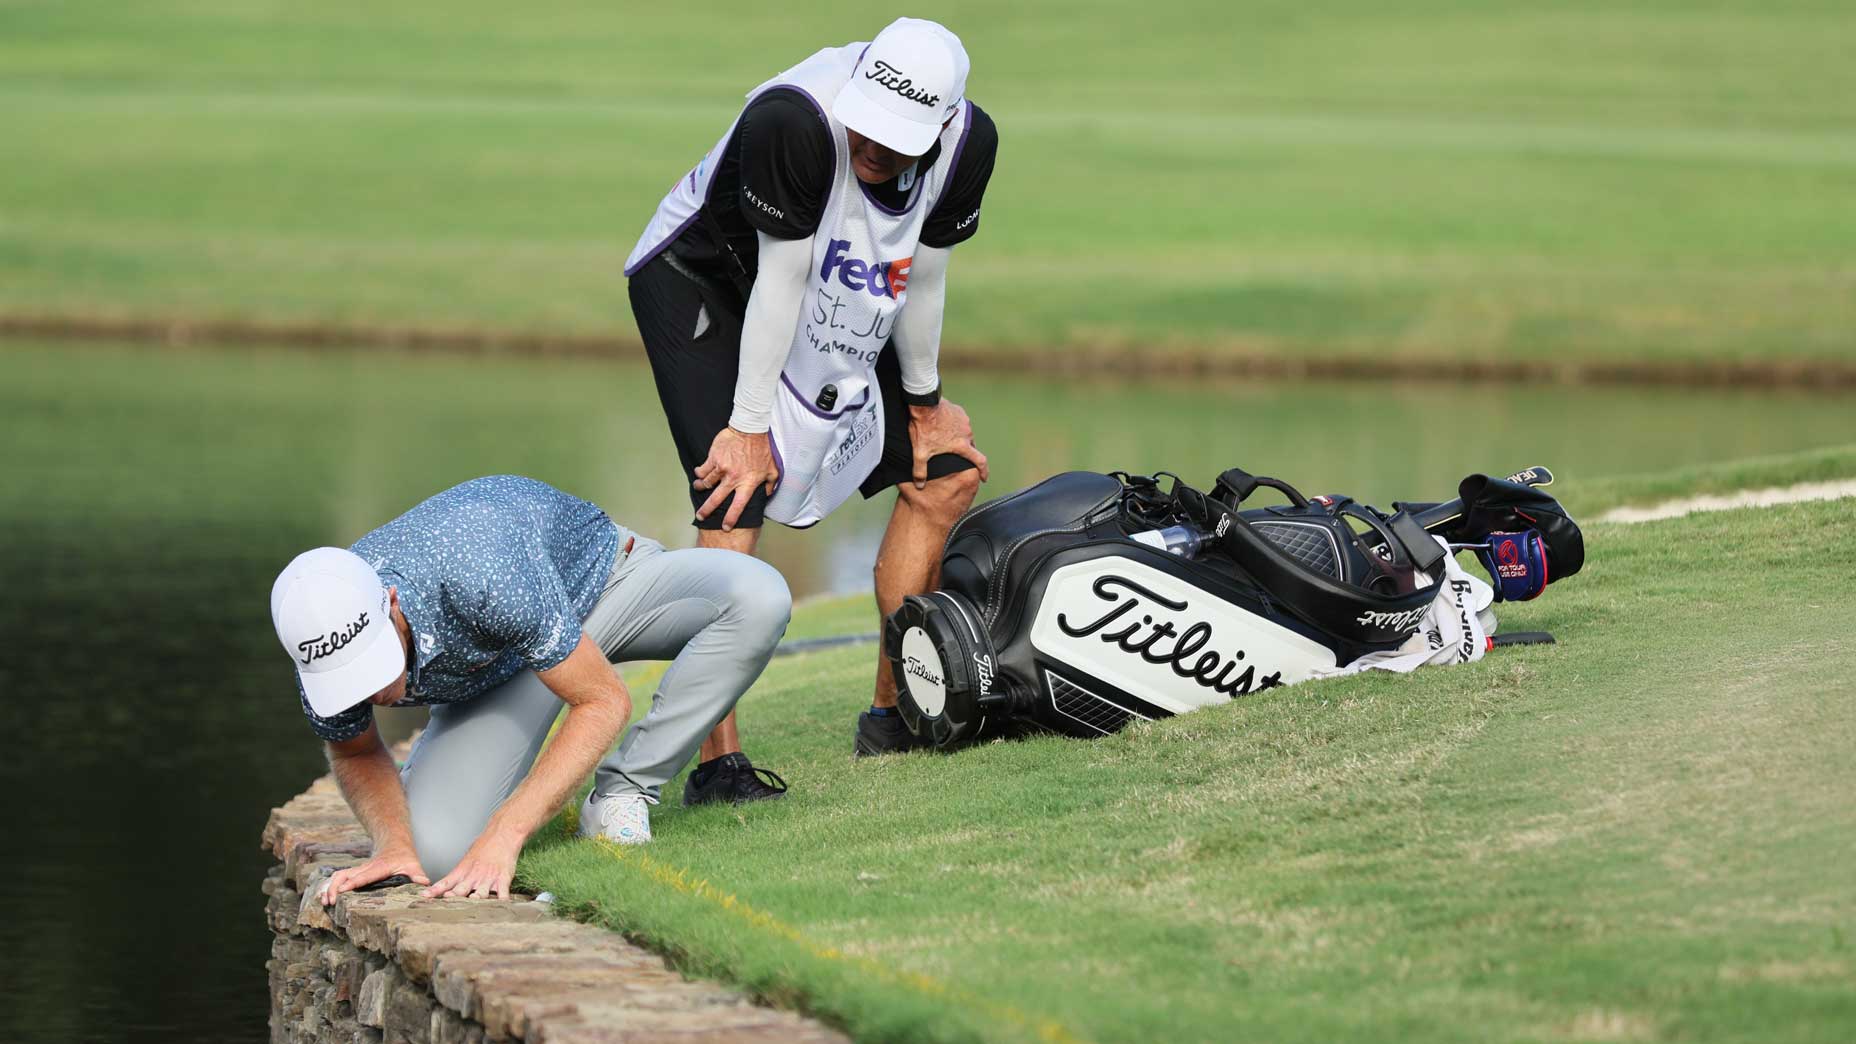 Will Zalatoris looks at his golf ball nestled between a stone wall and the turf.